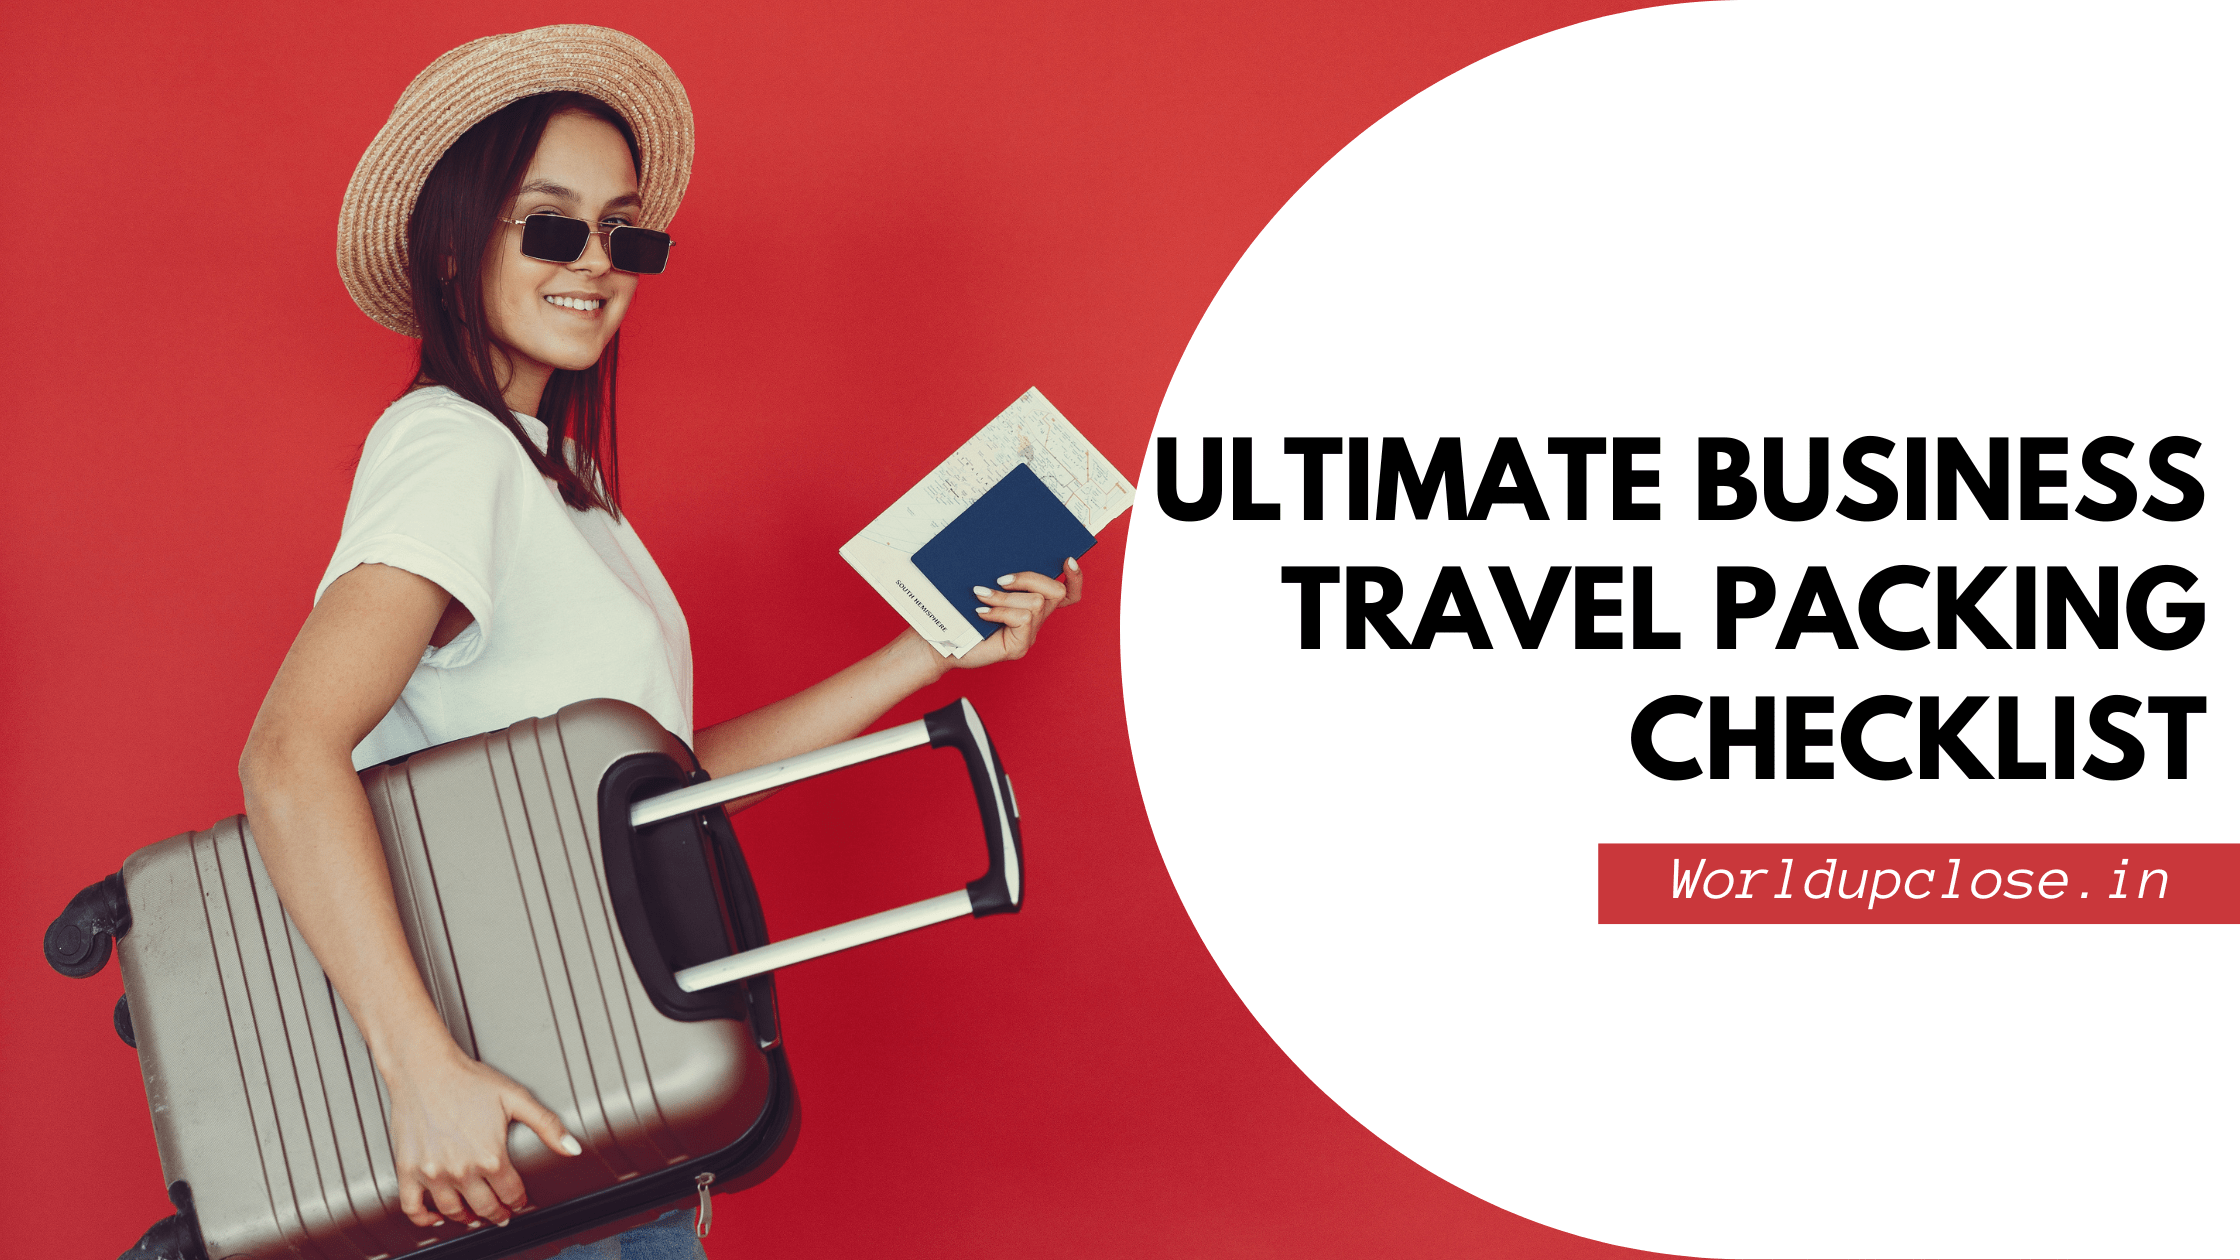 Ultimate Business Travel Packing Checklist 4